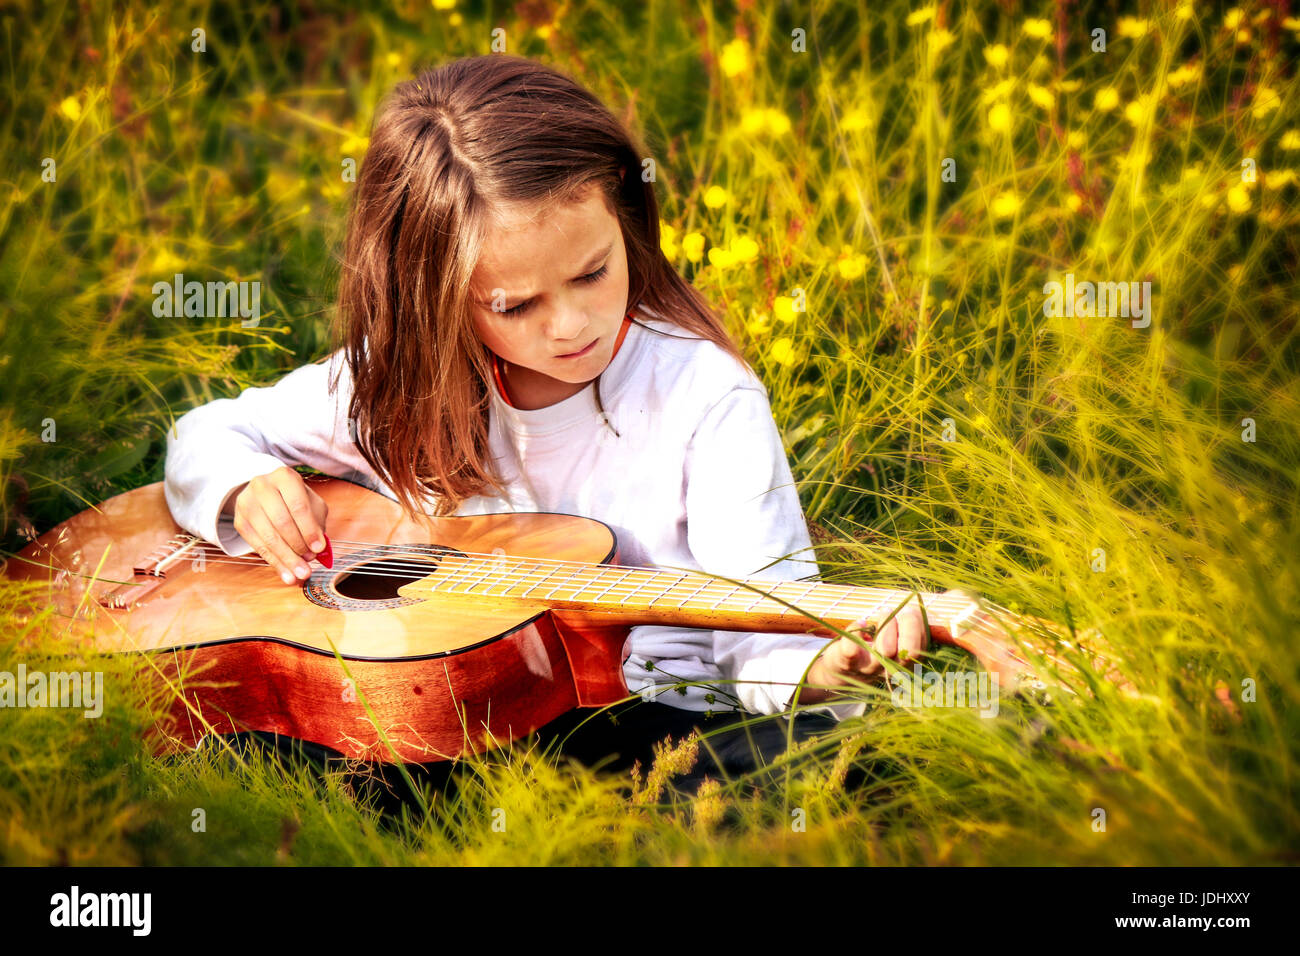 Child Sitting in the Tall Grass Playing Guitar Stock Photo